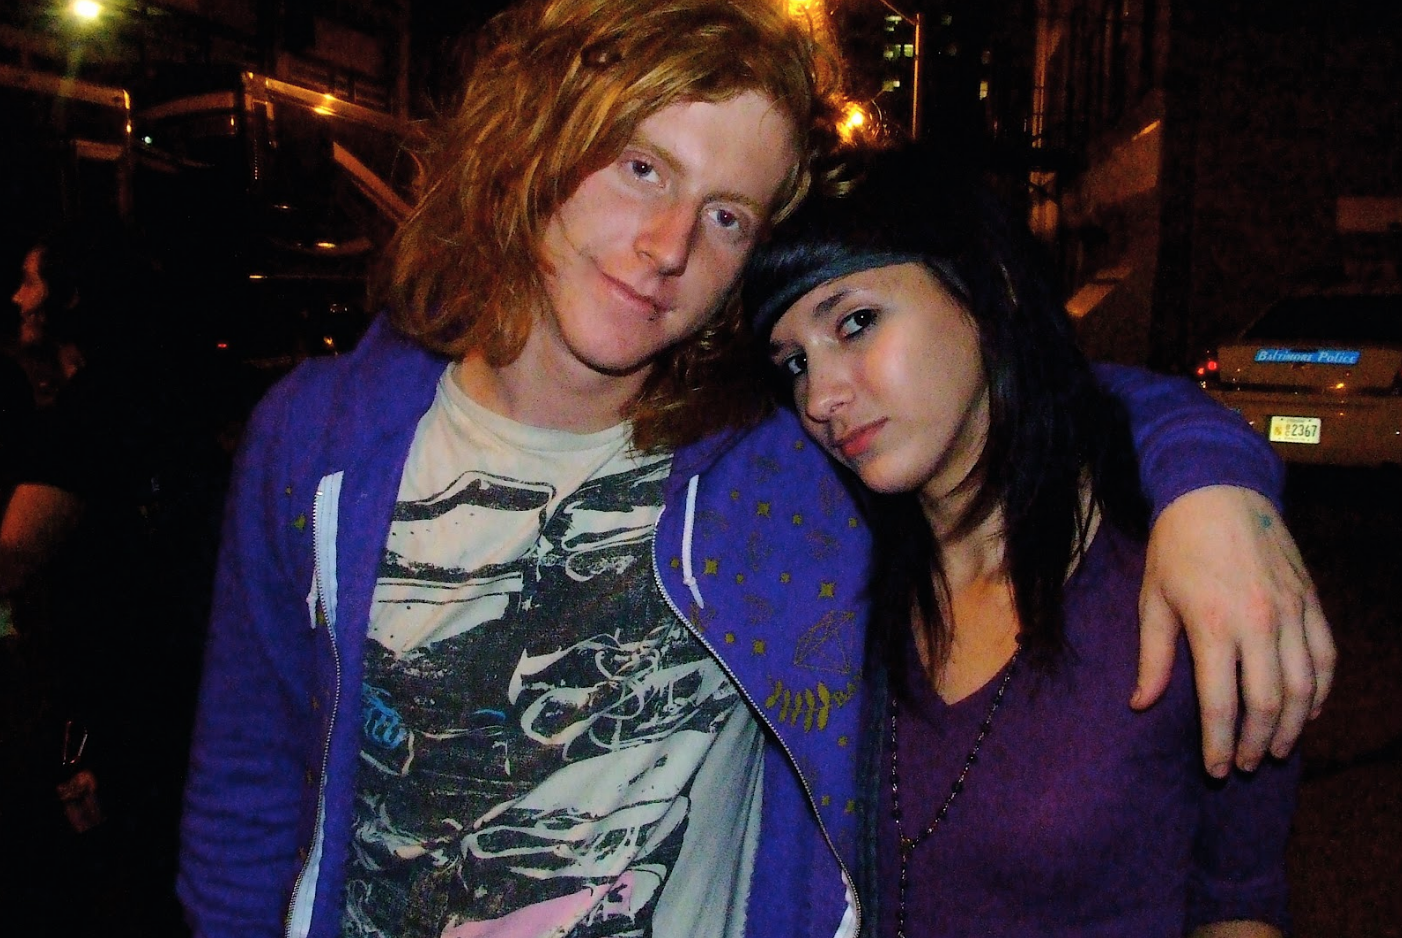 Patti with Travis of We The Kings some time in the mid-2000s